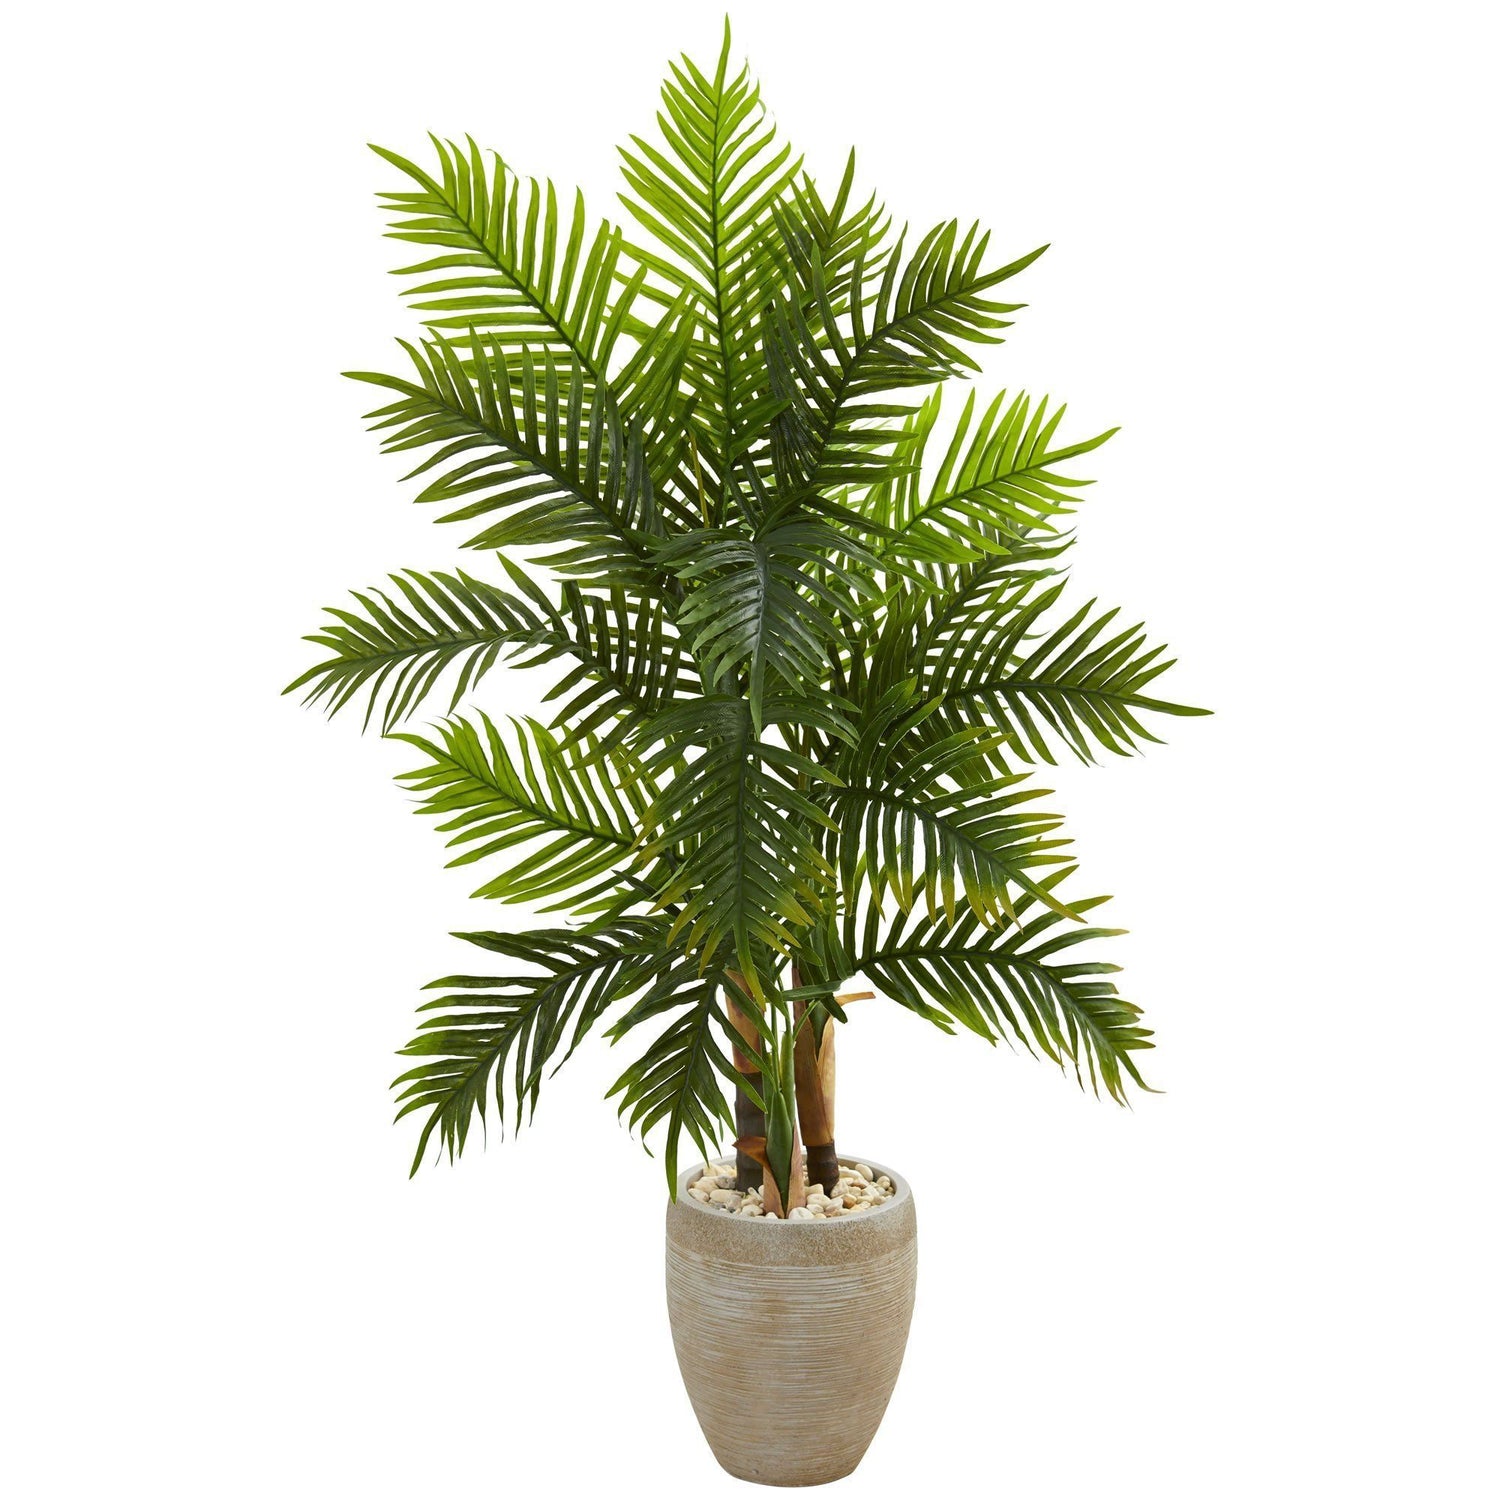 5’ Areca Palm Artificial Tree in Sand Colored Planter (Real Touch)